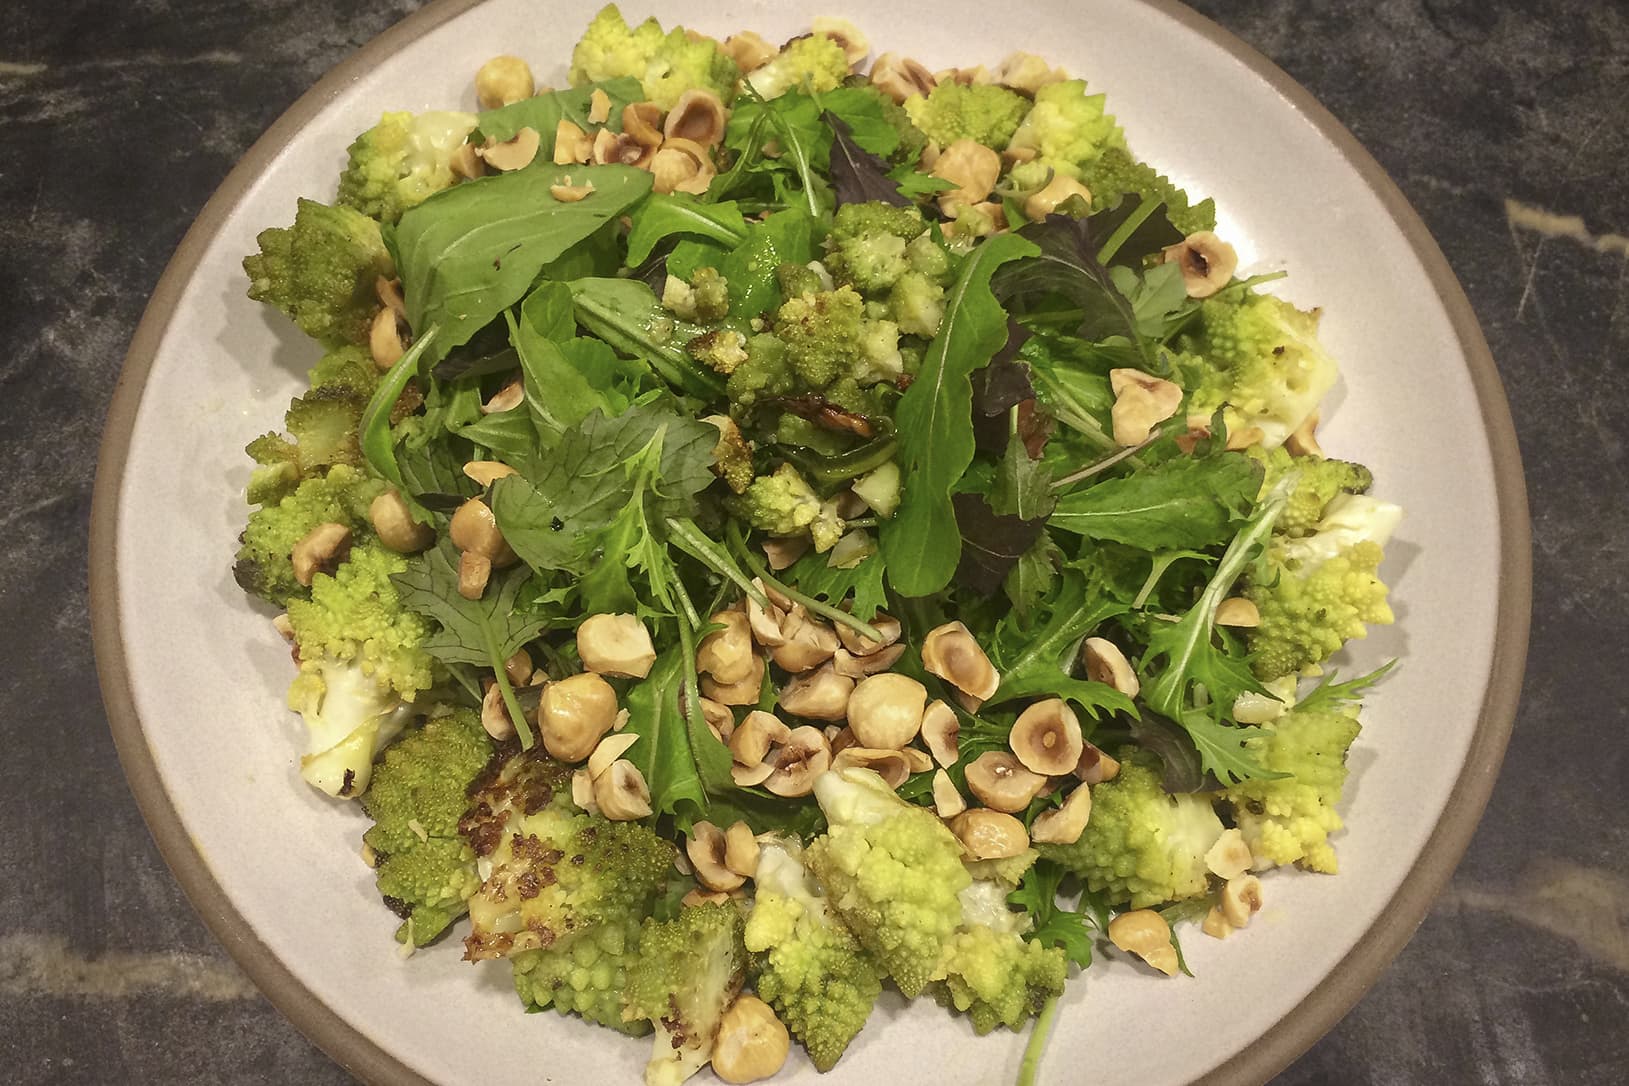 Kathy's roasted cauliflower salad with winter greens, toasted hazelnuts and tahini vinaigrette. (Kathy Gunst for Here & Now)